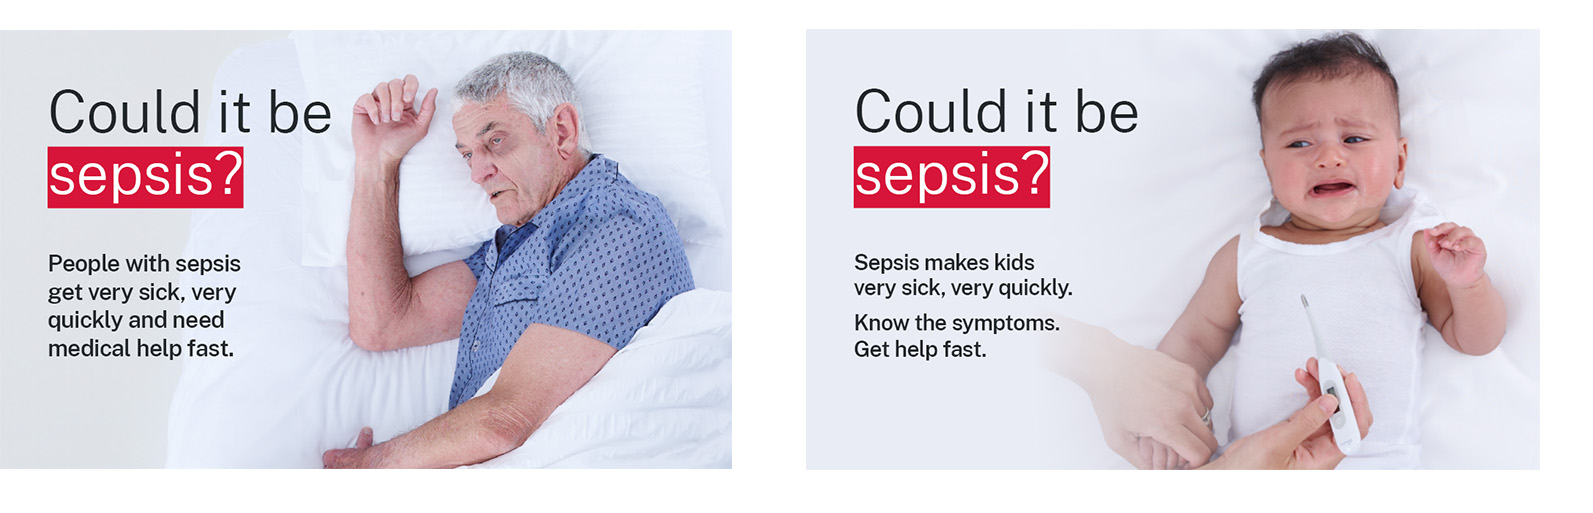 Could it be sepsis